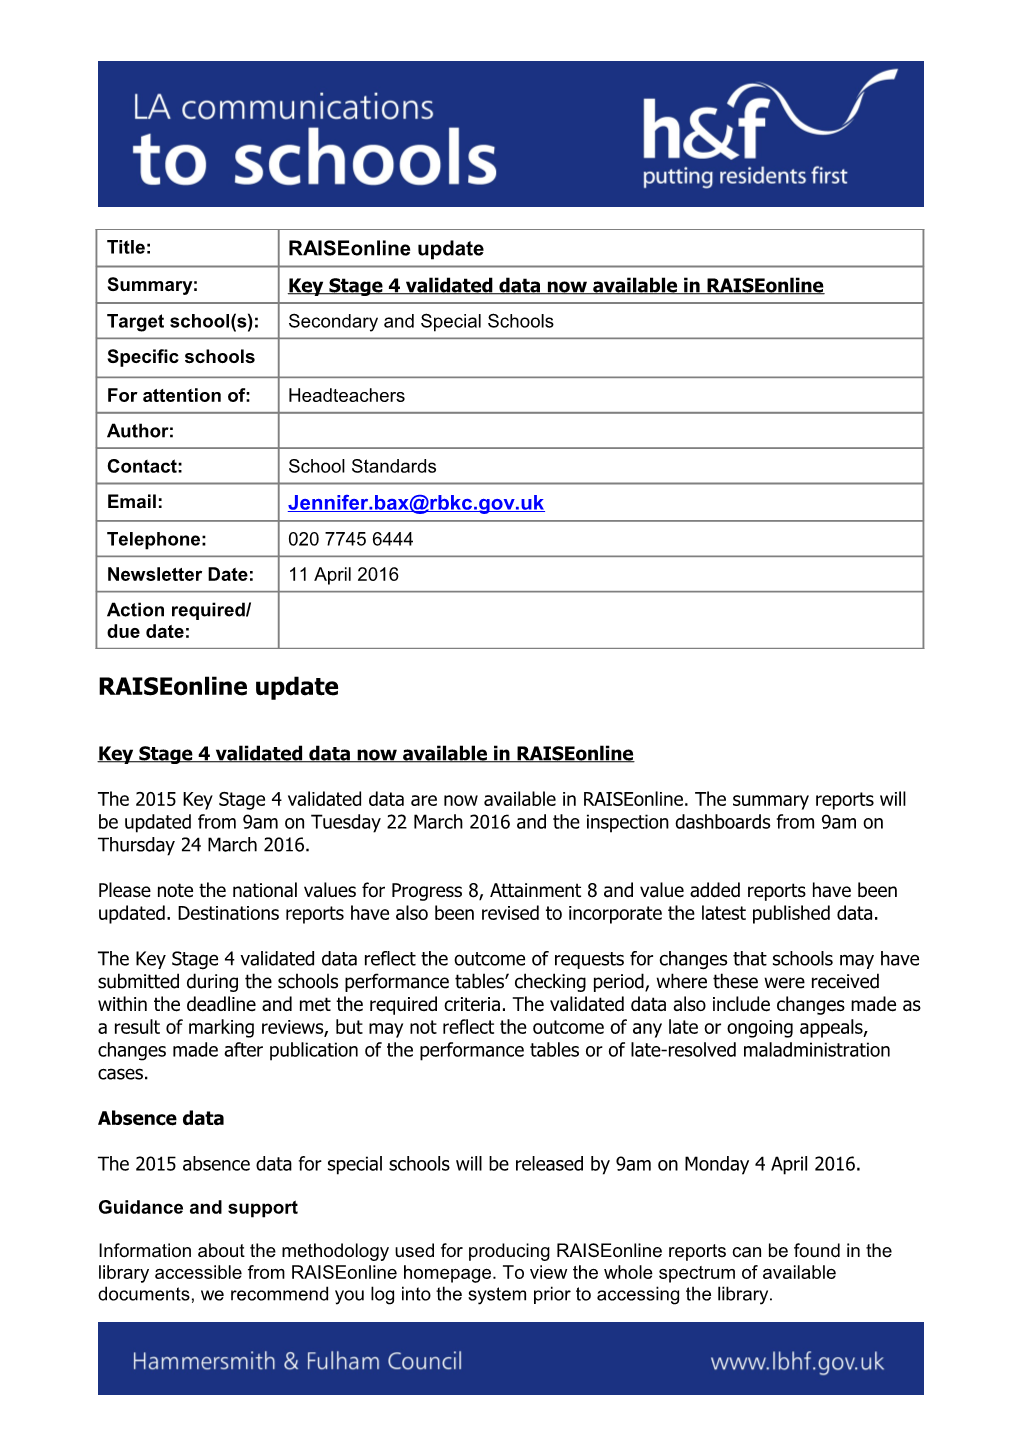 Key Stage 4 Validated Data Now Available in Raiseonline